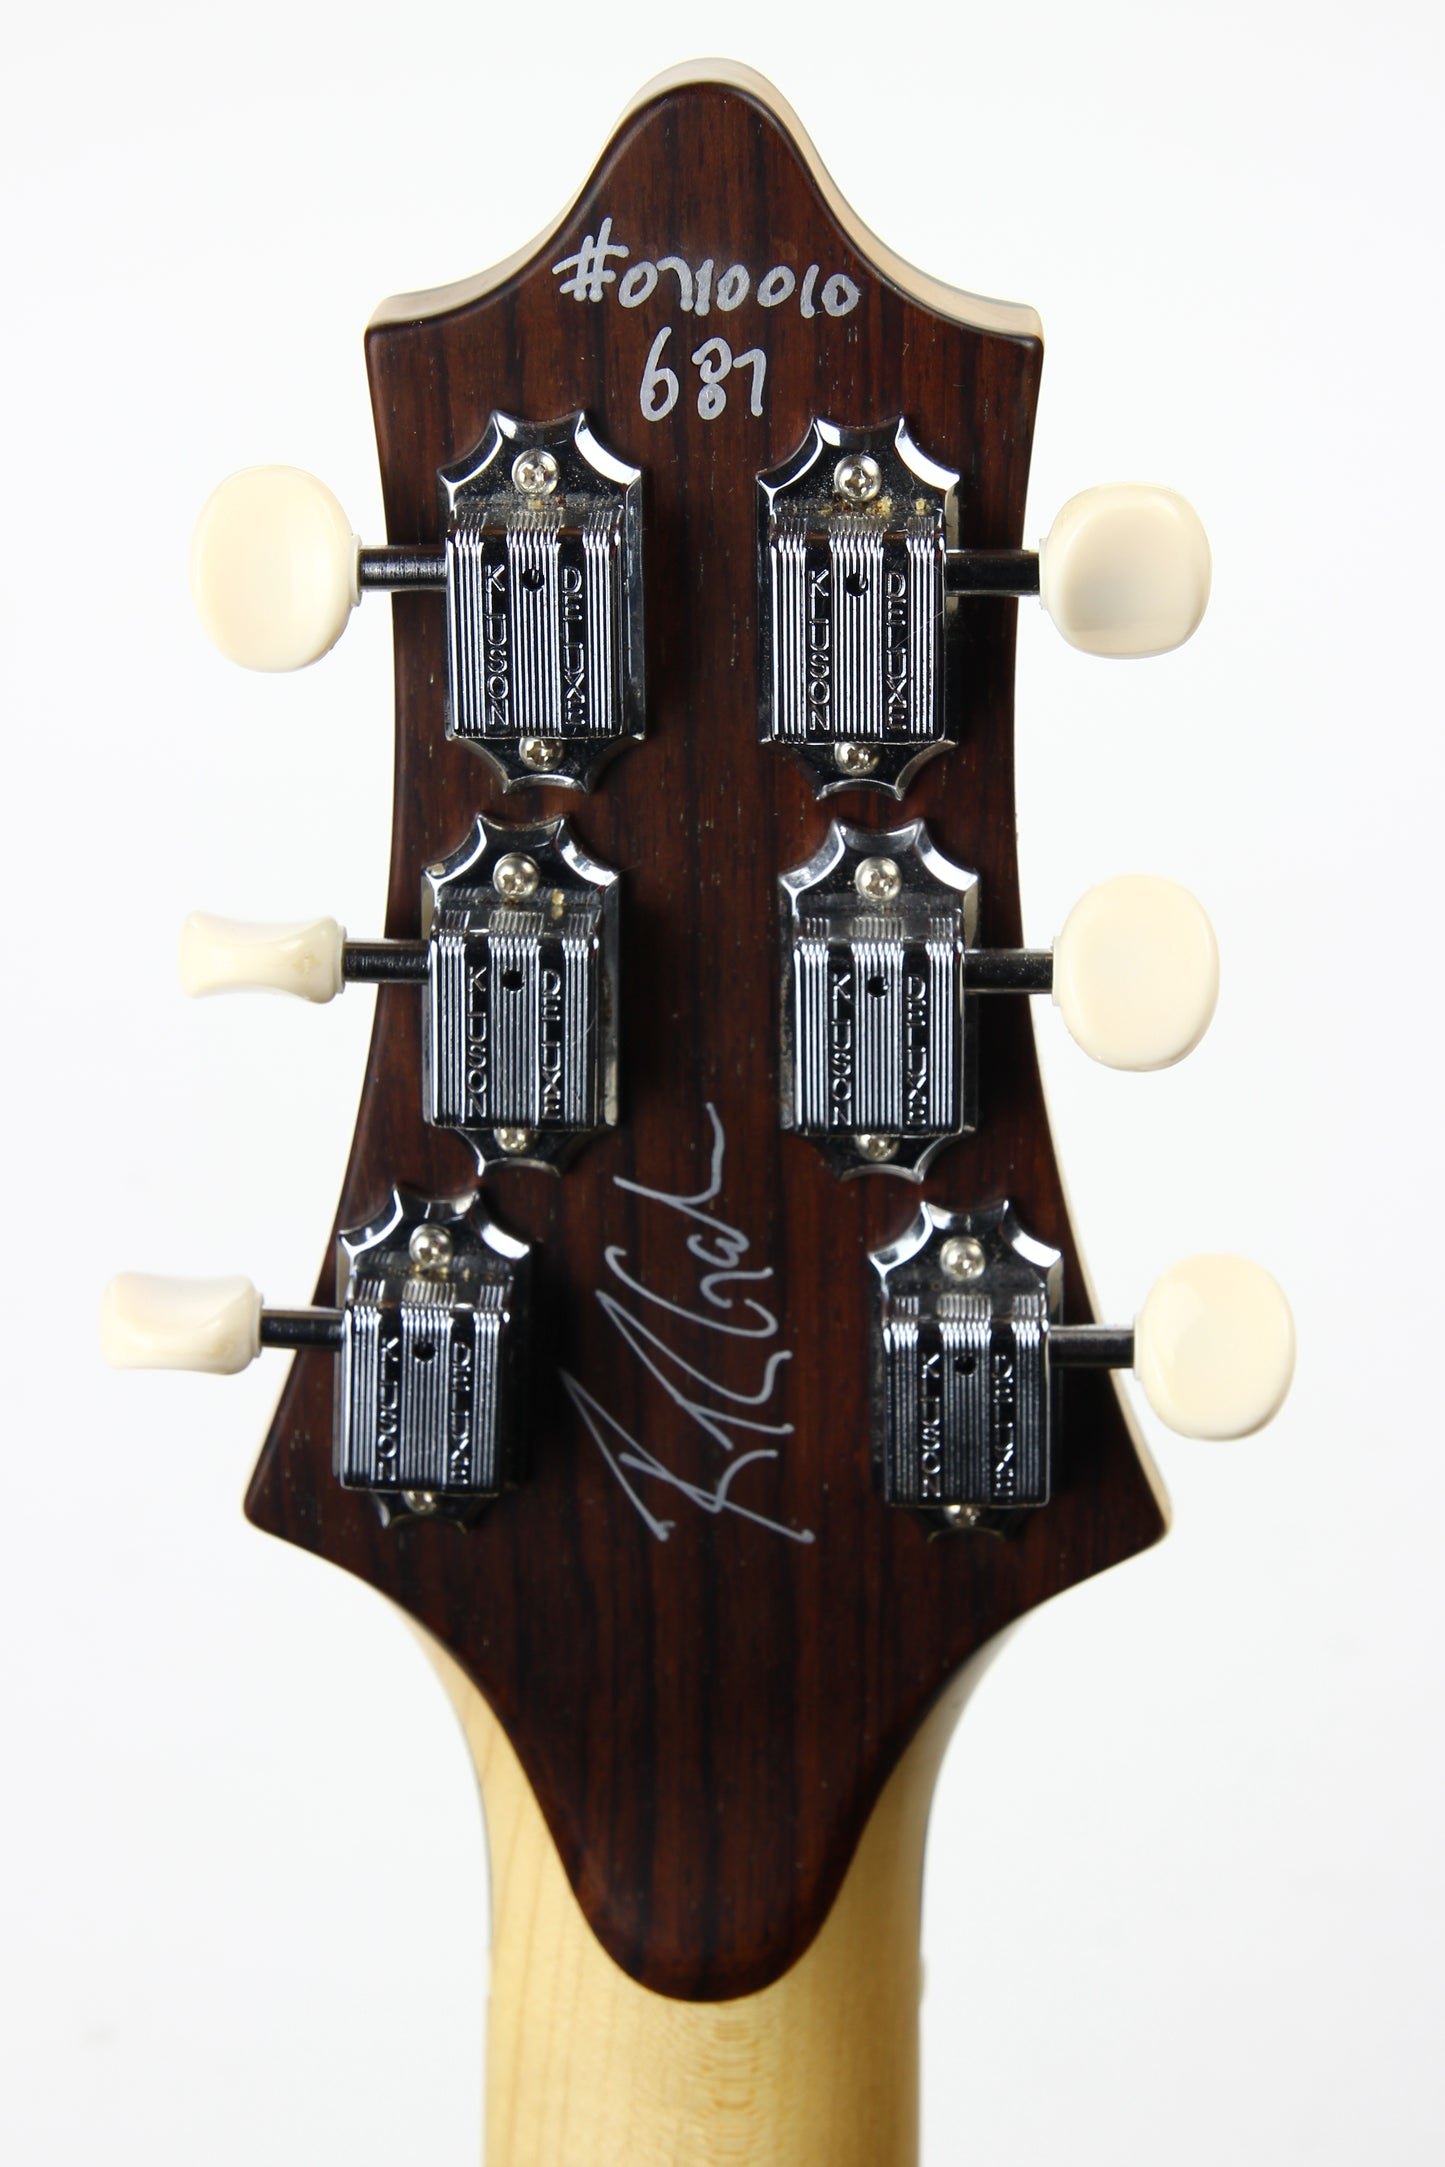 2007 Gadow Nashville "49" #1 of 24 Made - Limited Edition Tele Tribute, Ponderosa Pine Body, Lindy Fralin